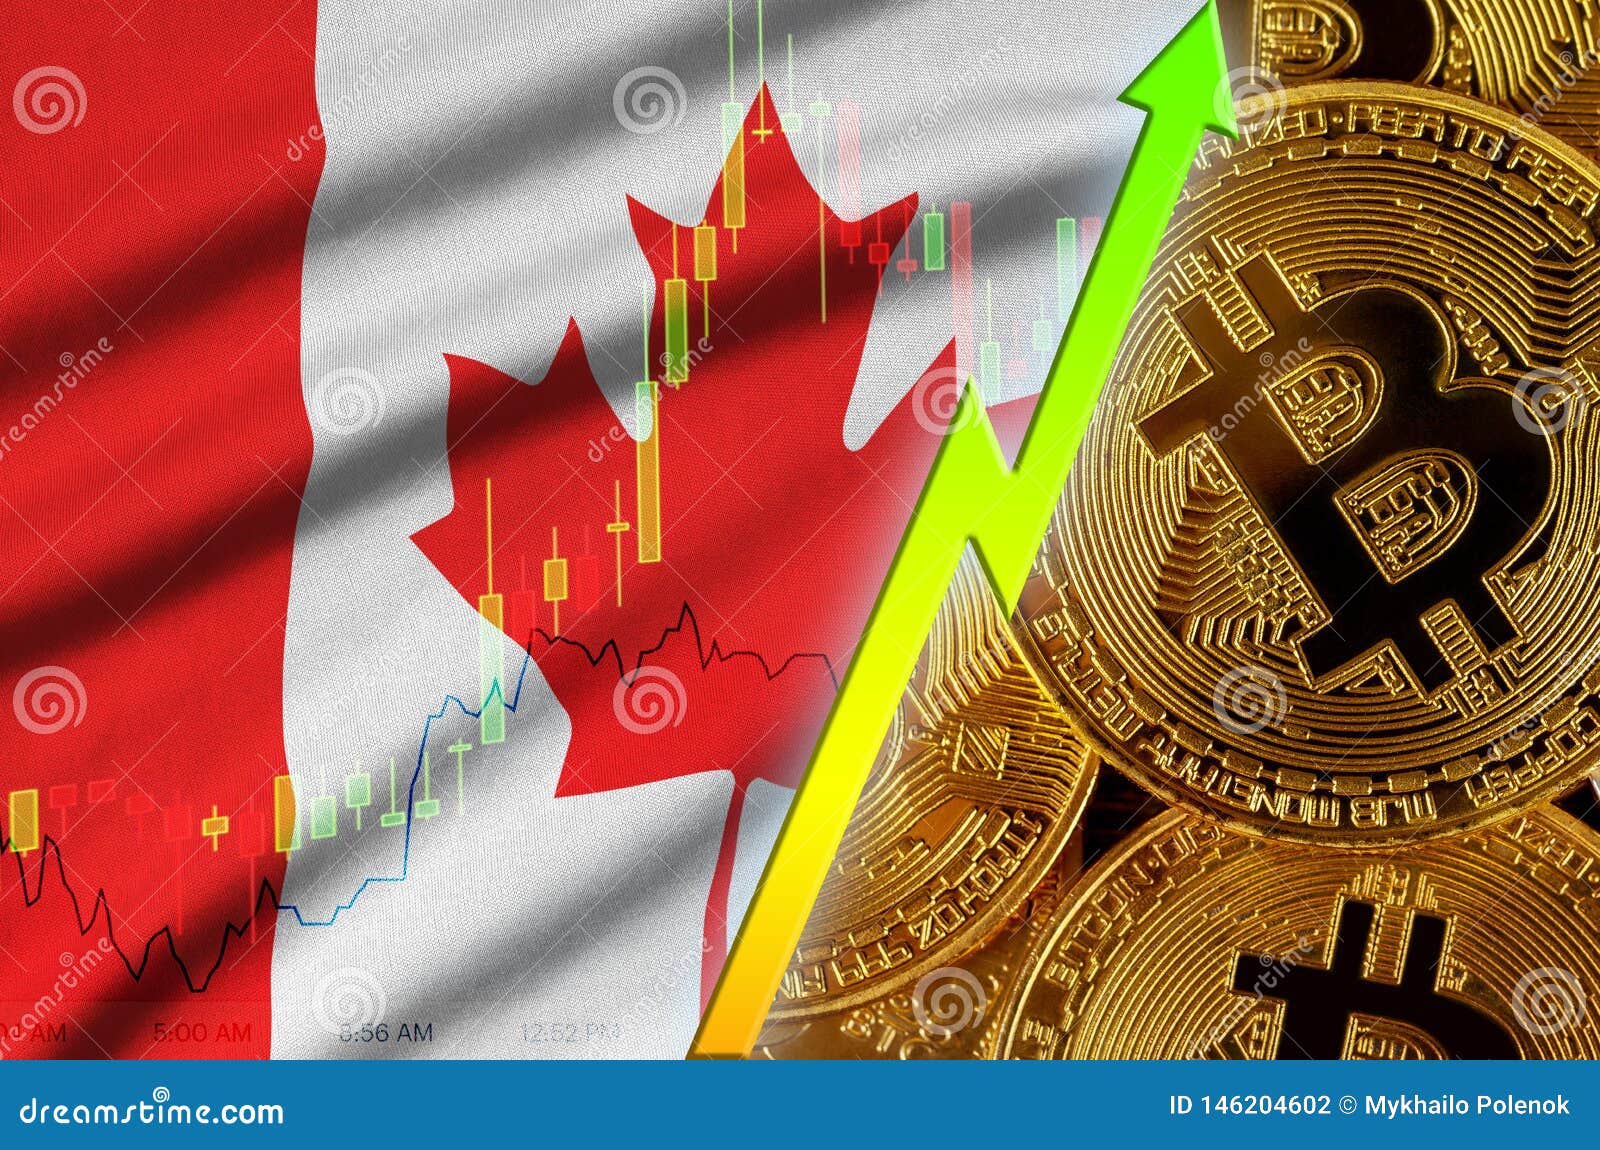 Cryptocurrency List Price Canada : The pros and cons of ...